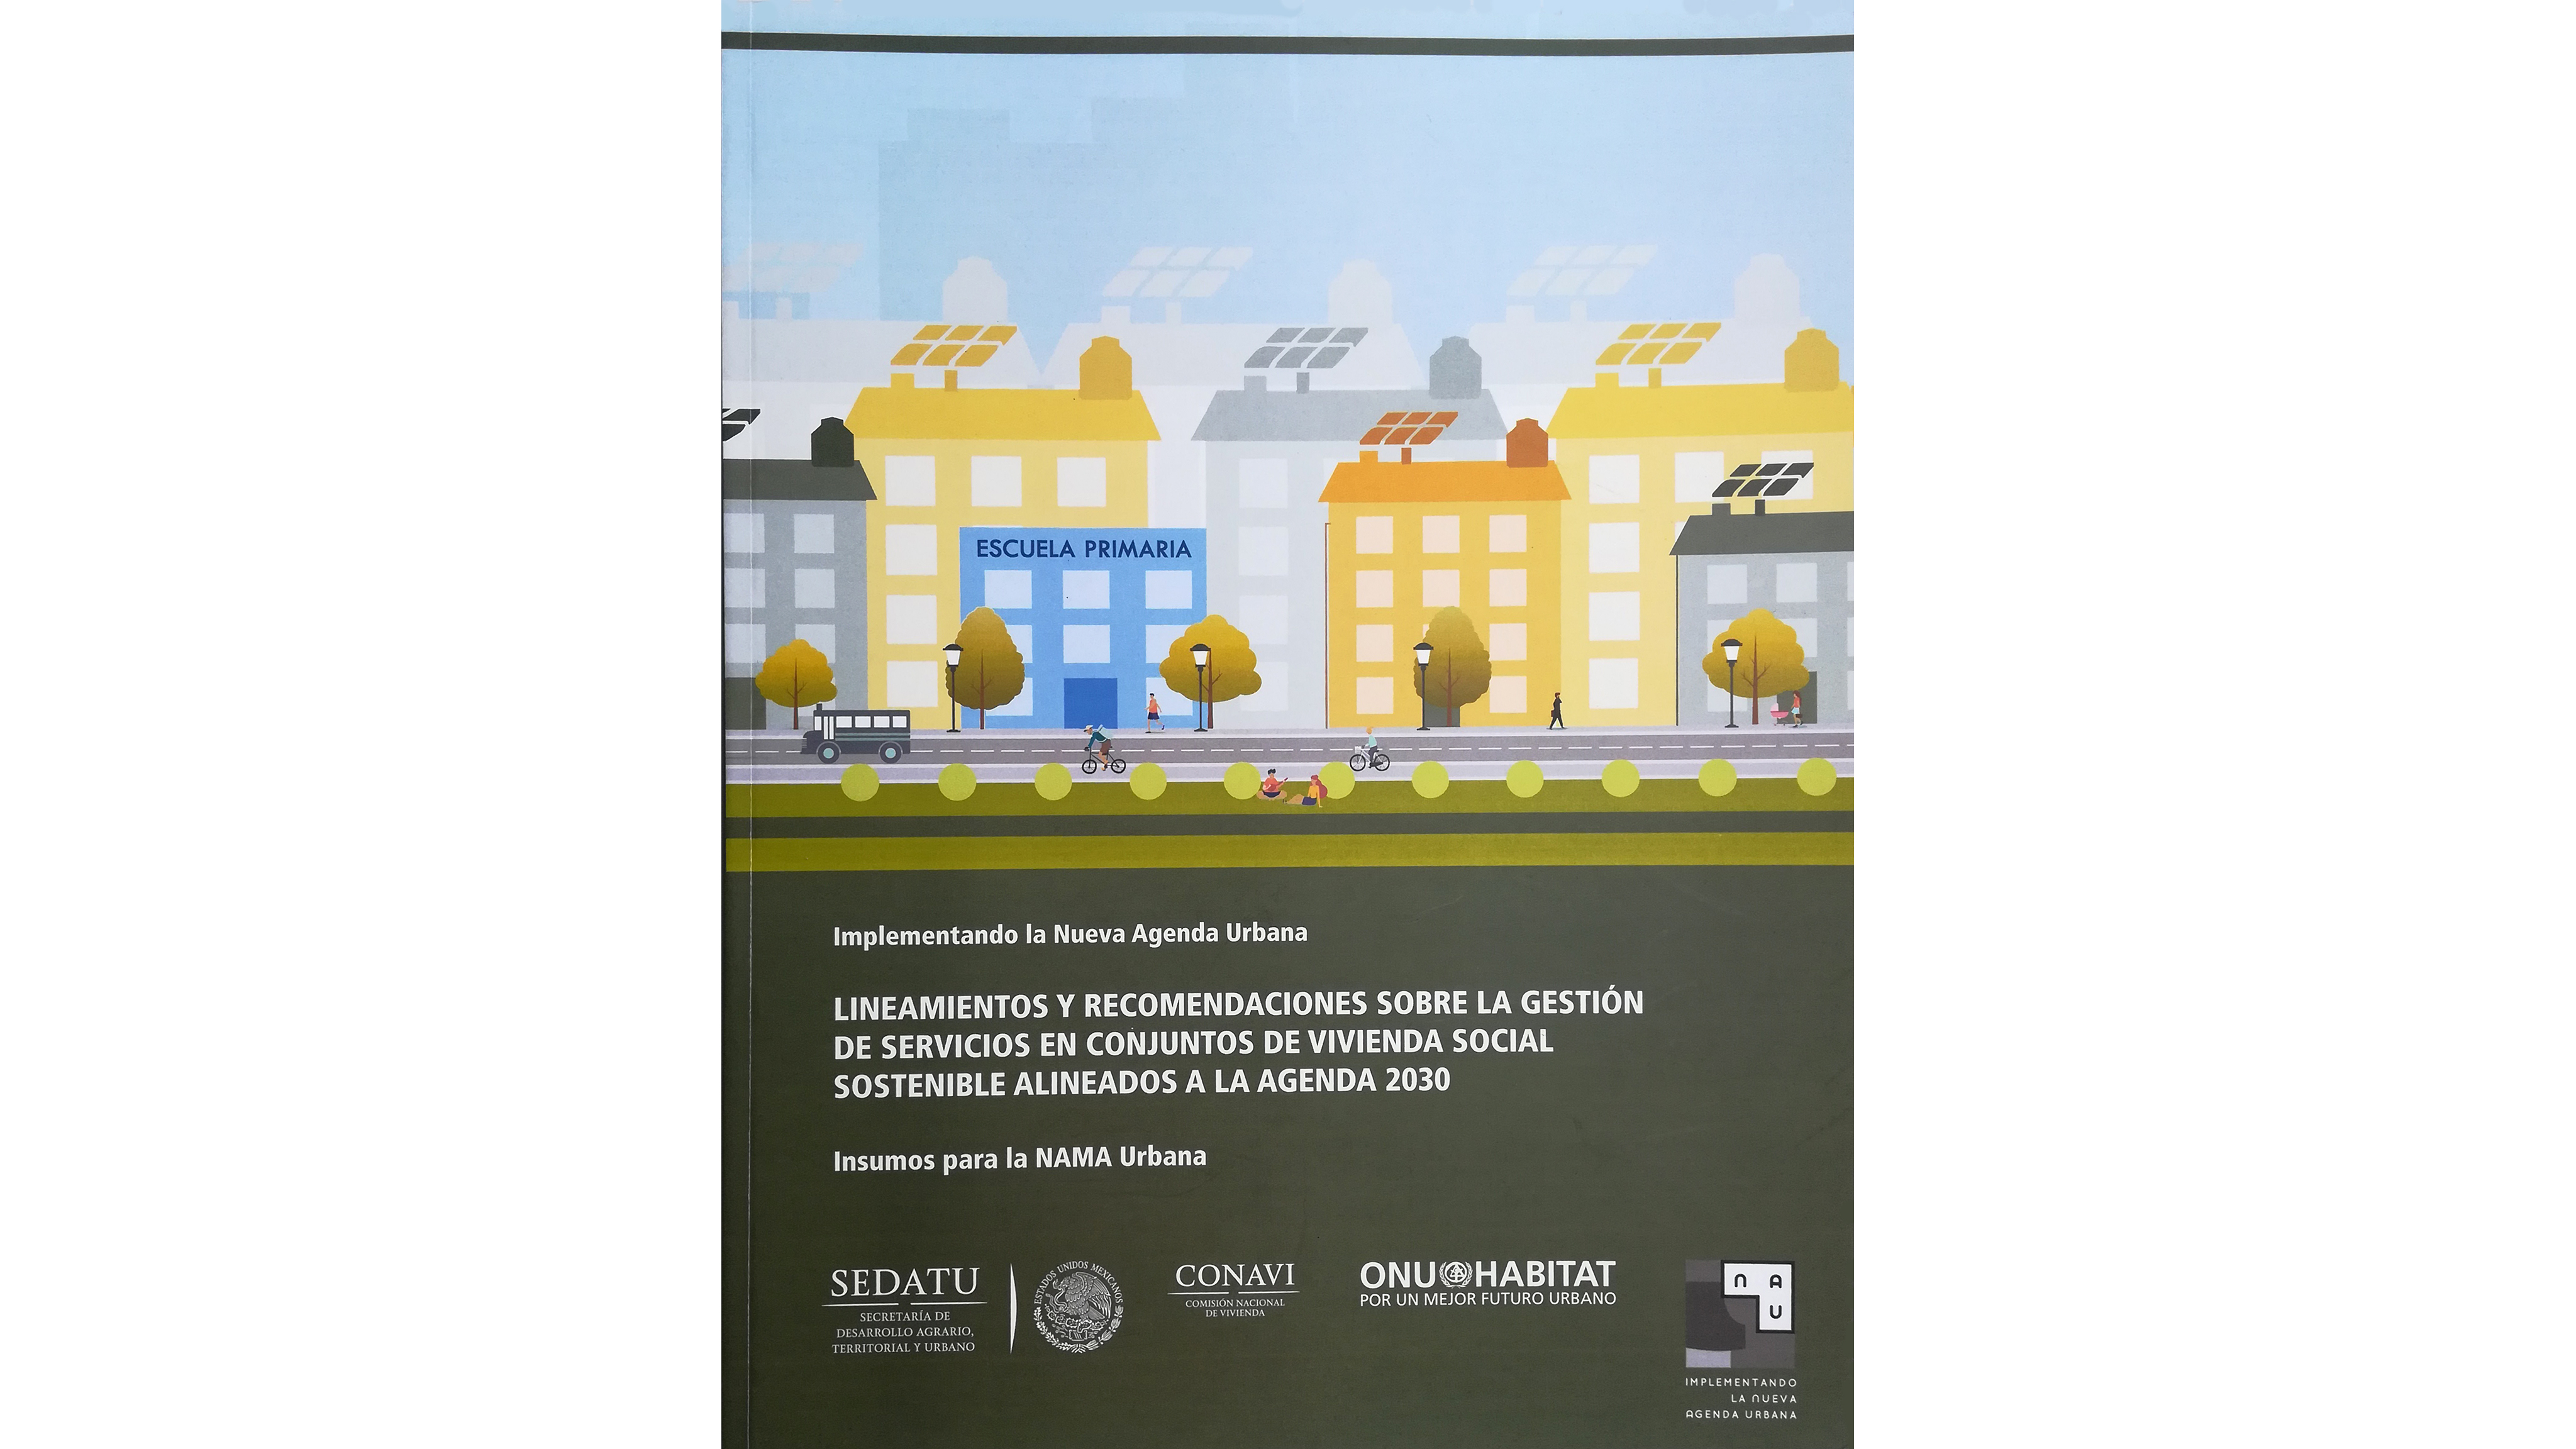 CONAVI Guidelines and recommendations on service management in sustainable social housing developments